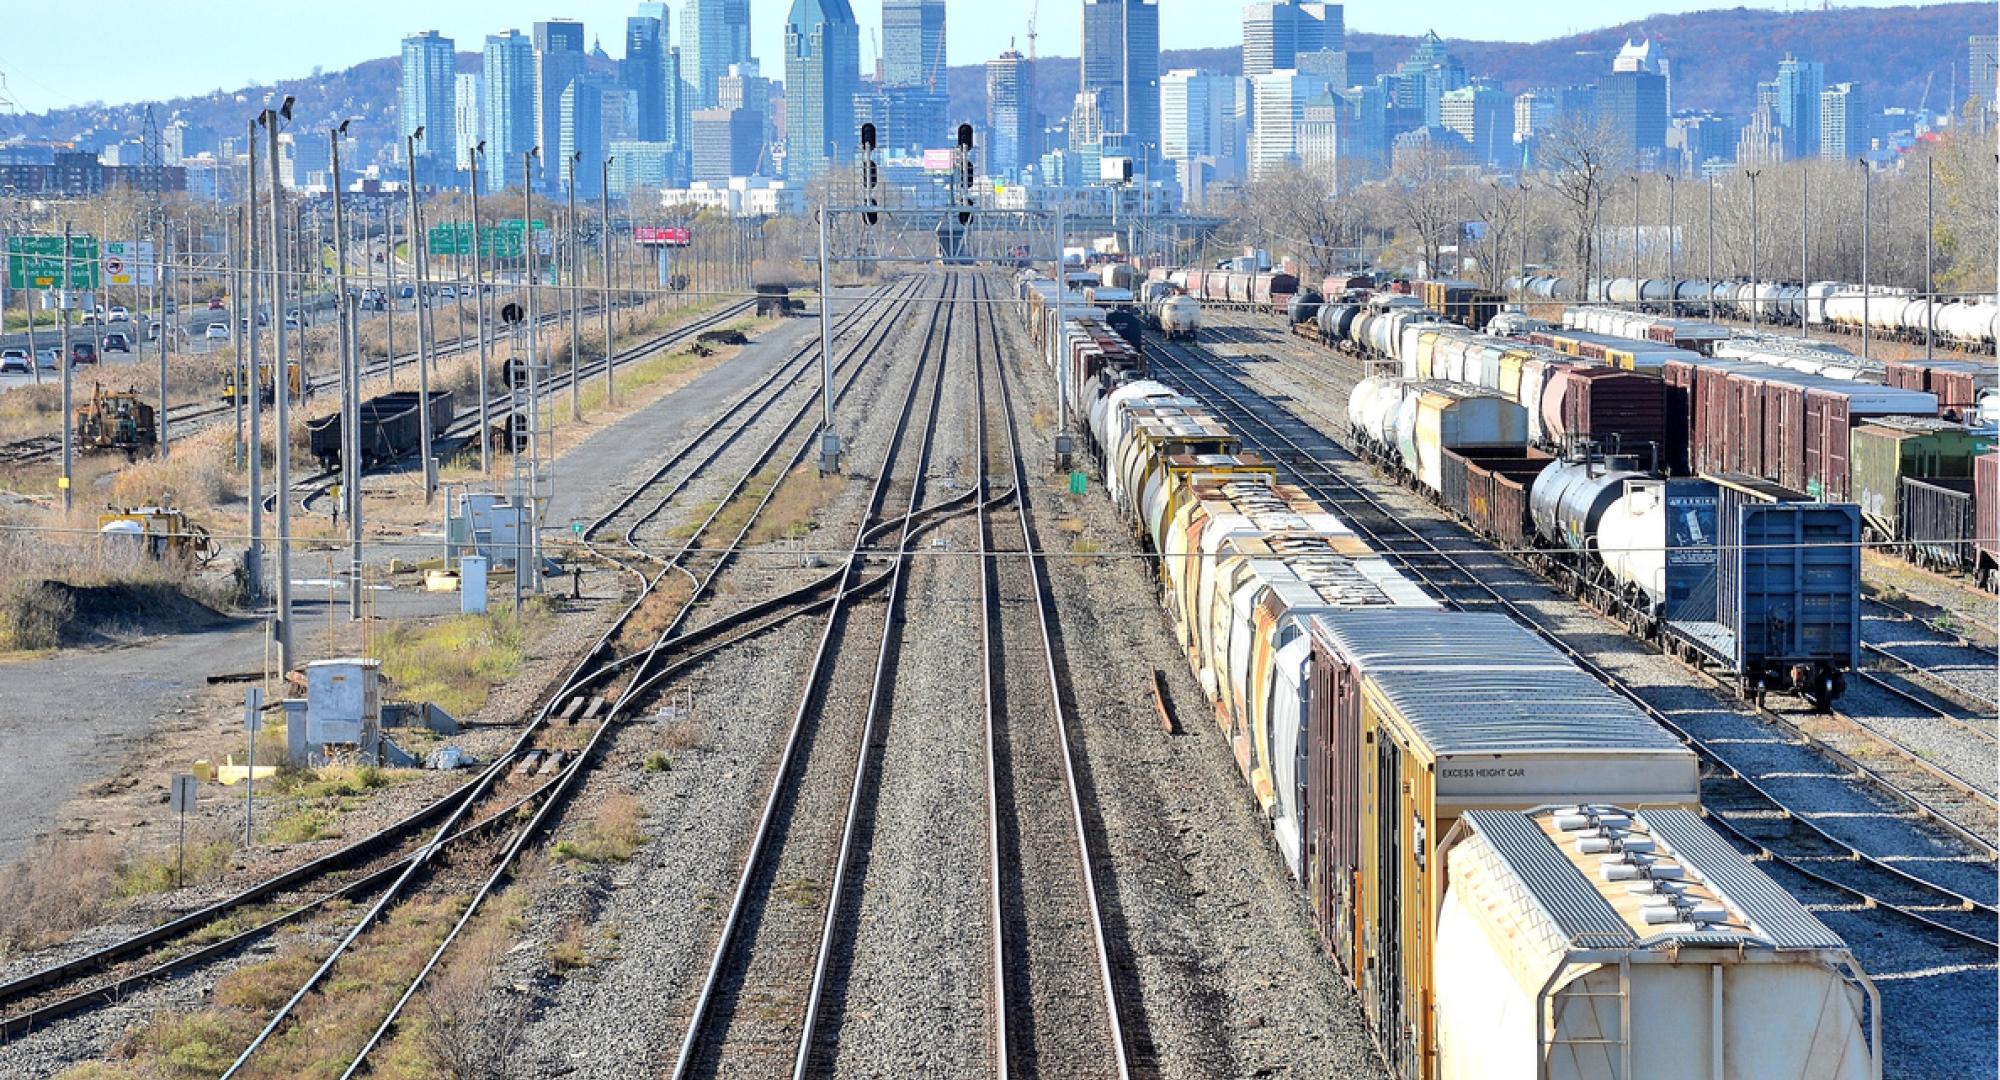 Montreal skyline with train tracks in the foreground